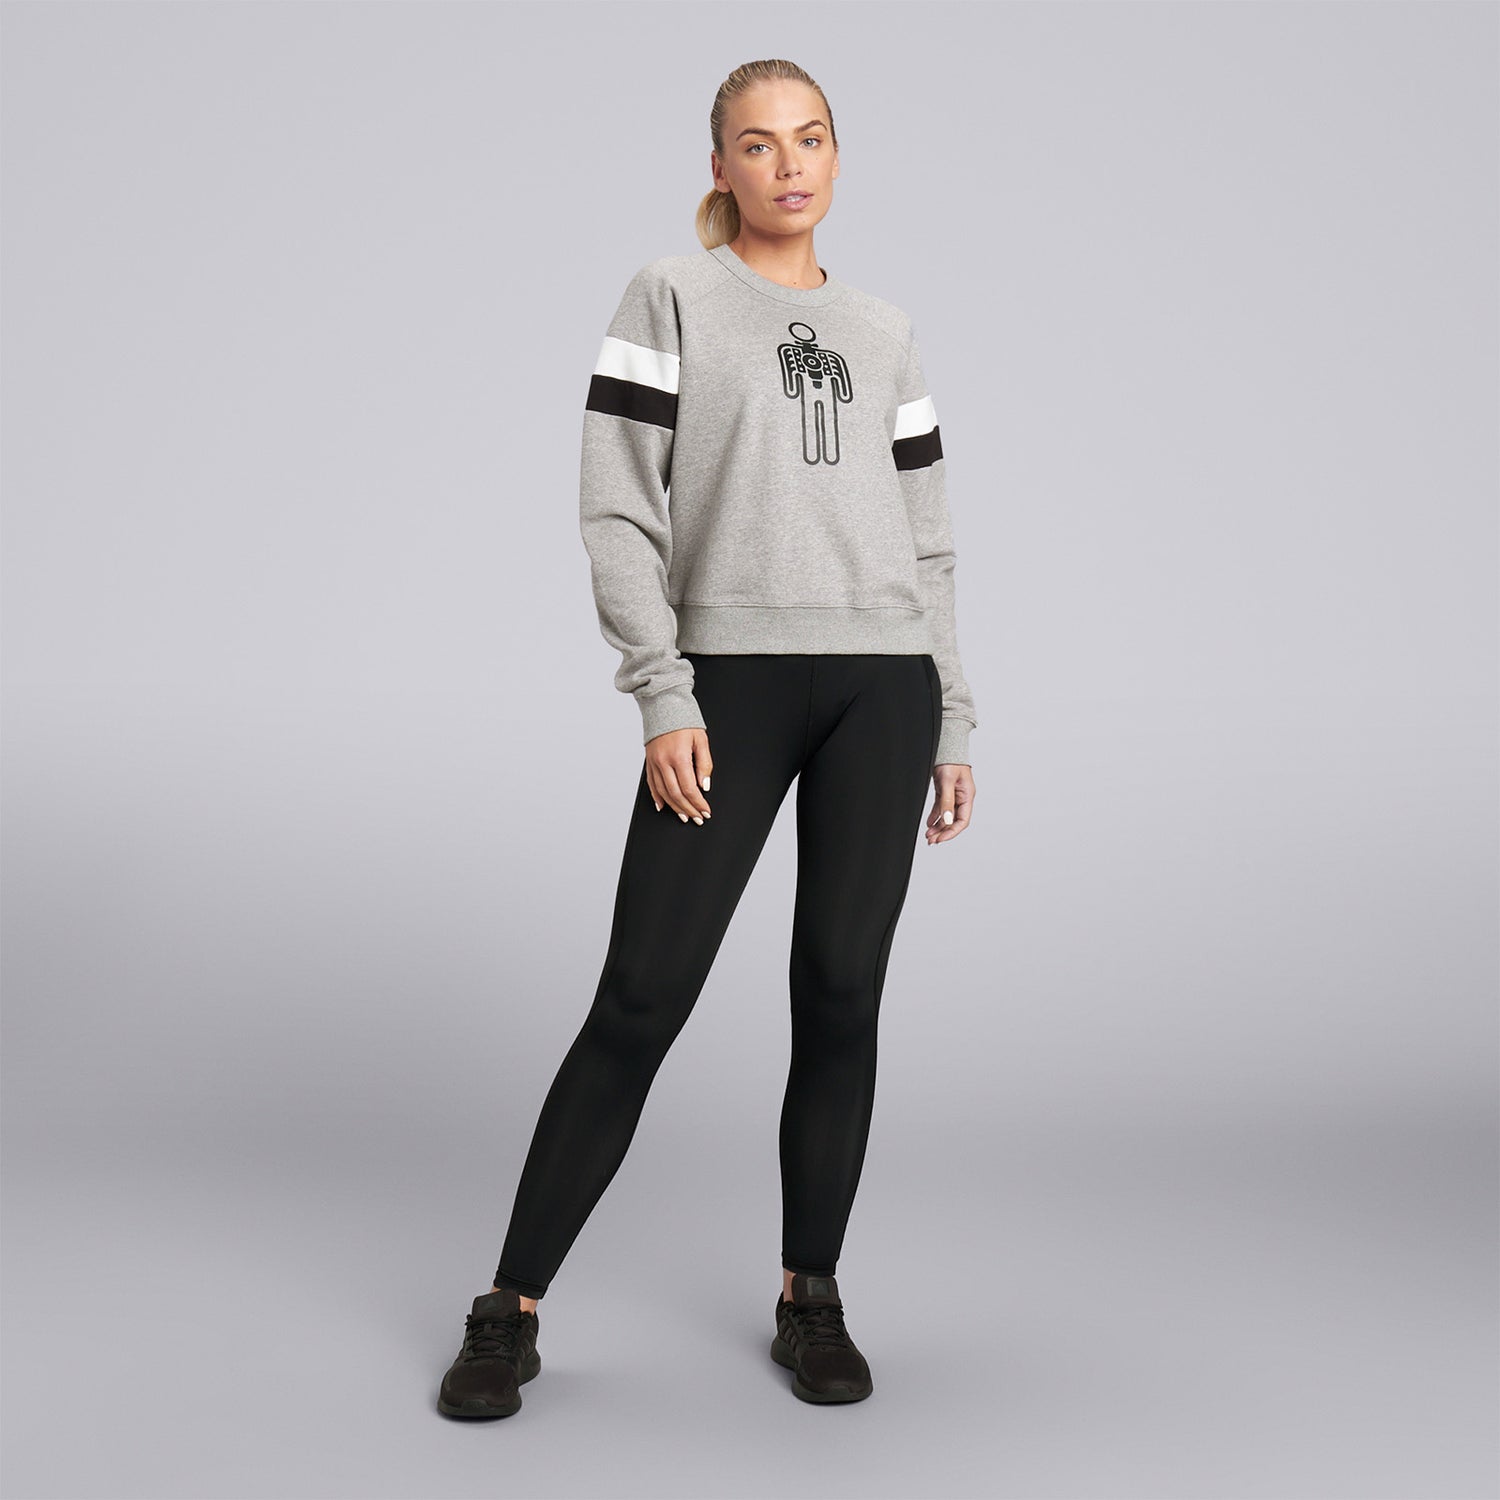 Women's Casual Athleisure Matching Sweatsuit Contrast Topstitching Quarter  Zip Thermal Lined Pullover Sweatshirt And Beam Feet Pants Set In LIGHT  COFFEE